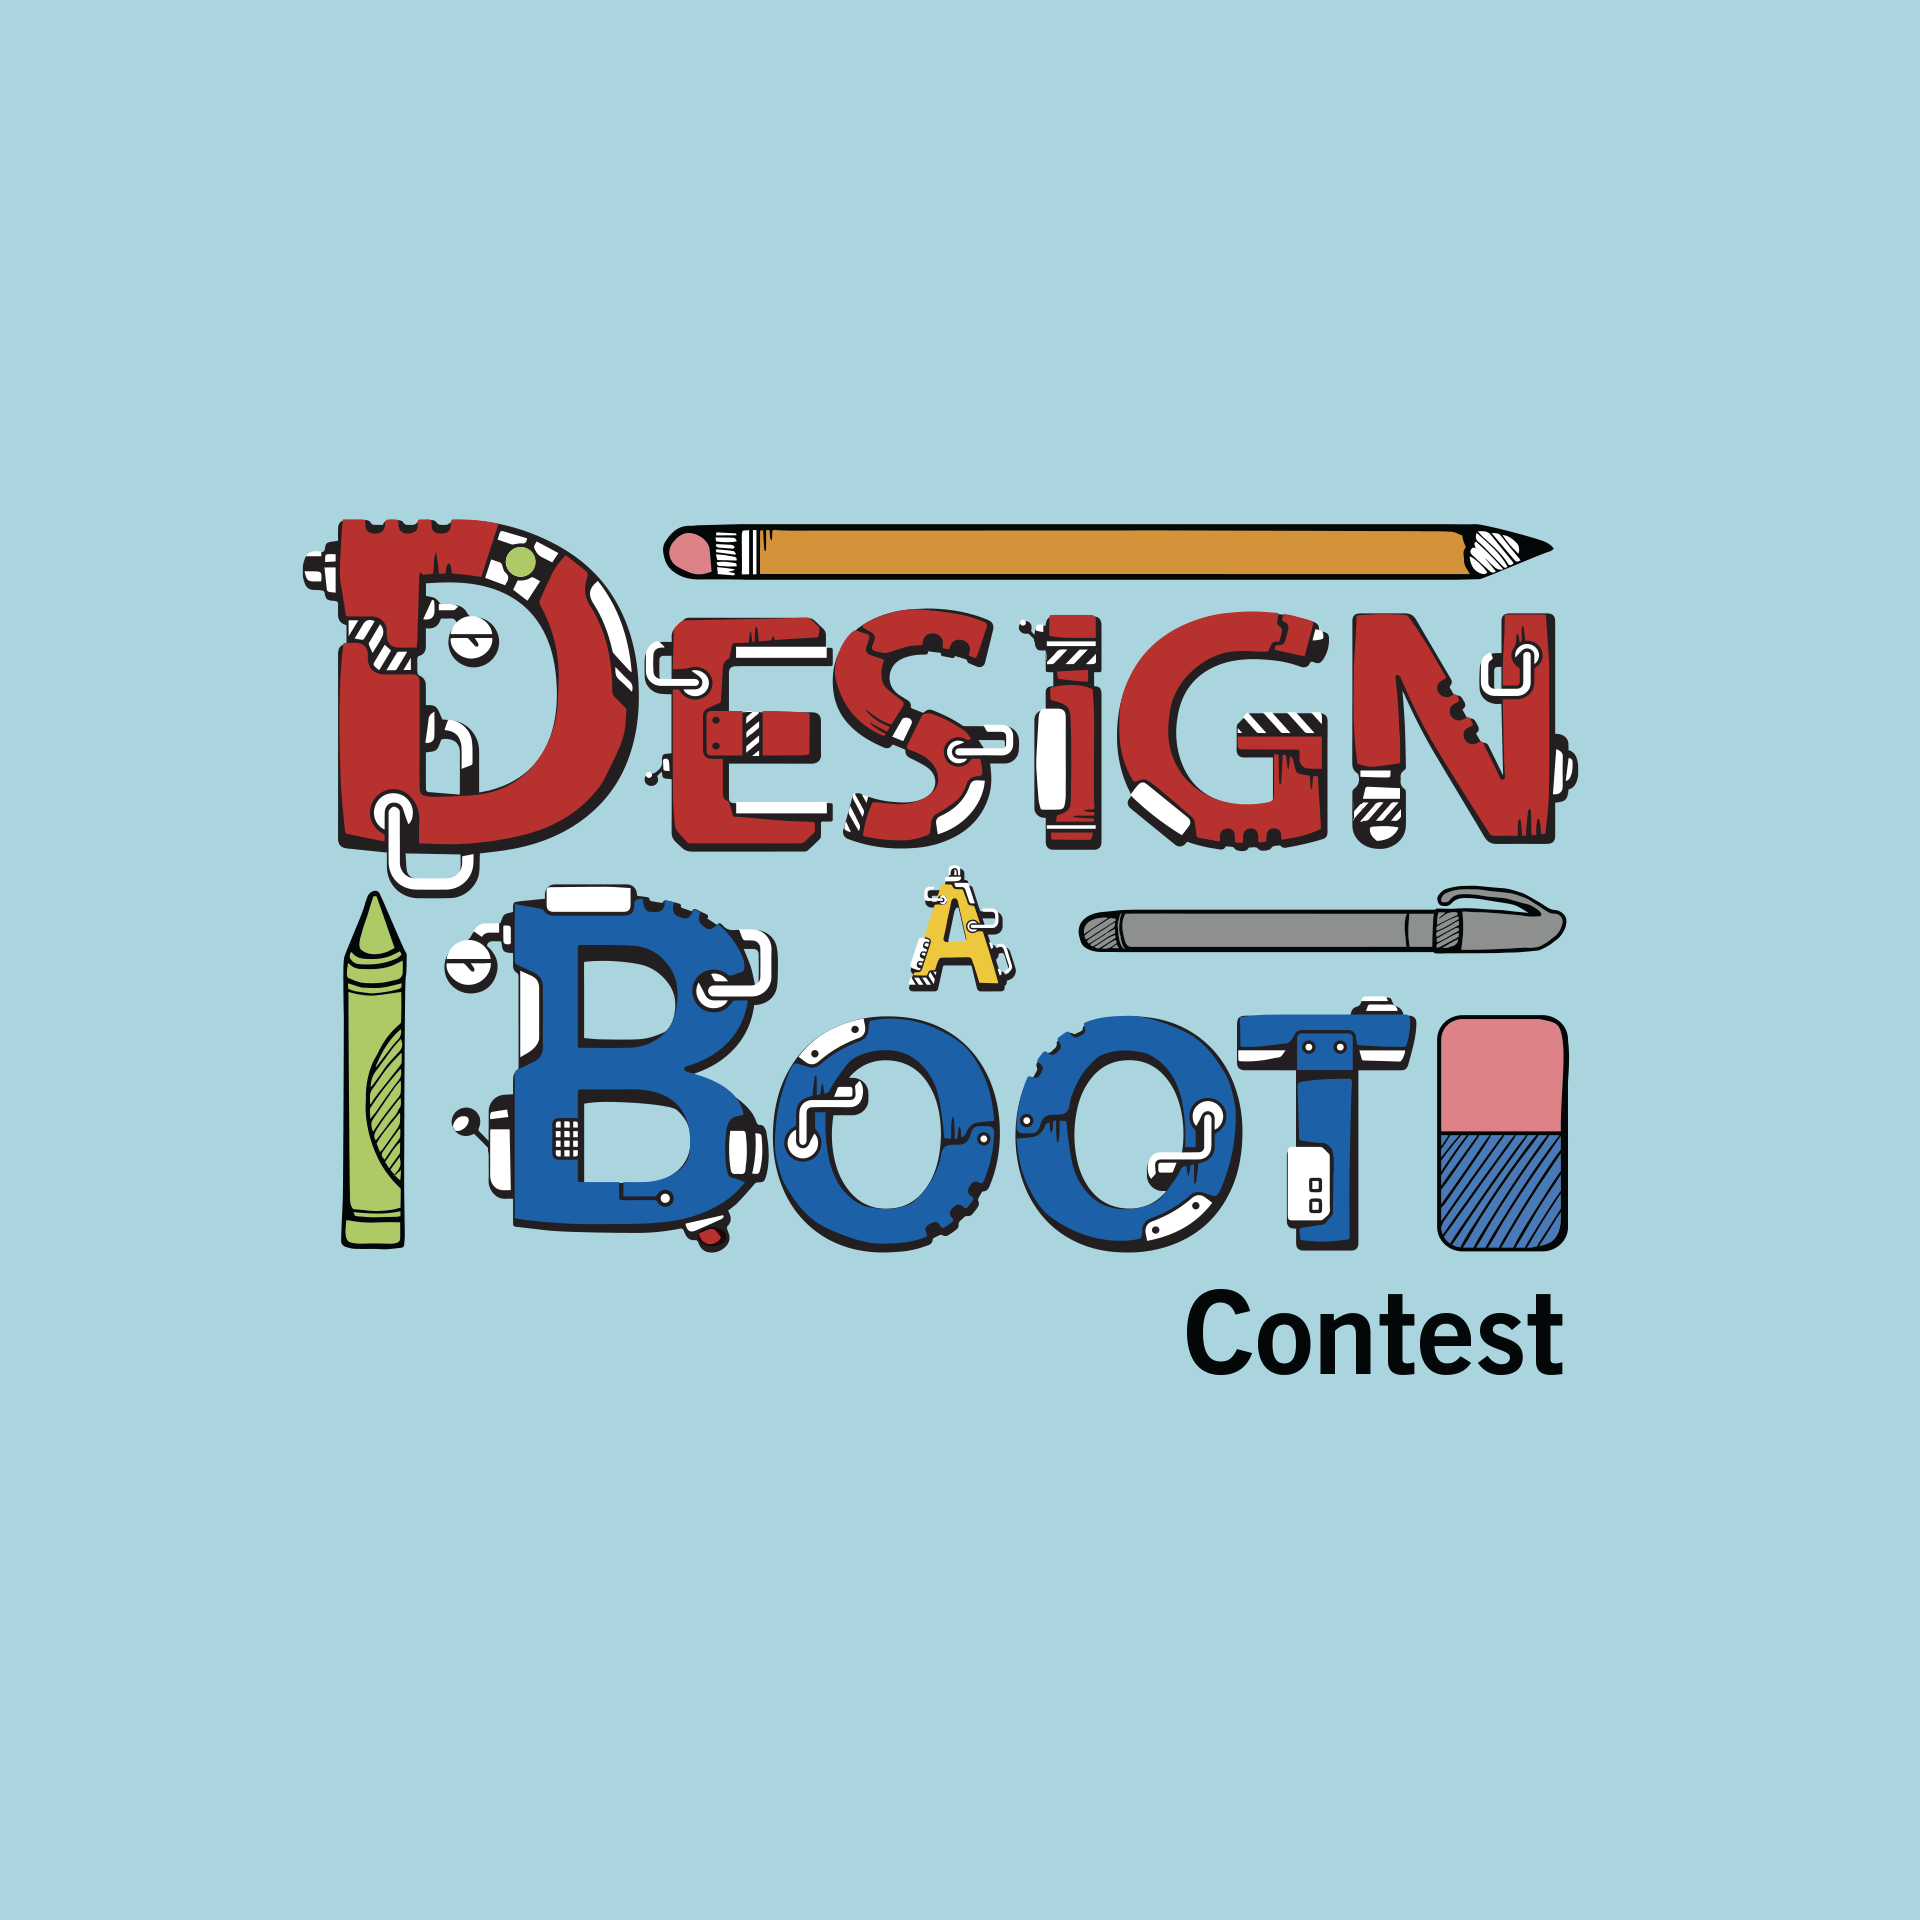 Learn More about our Design a Boot contest. Make sure to participate!